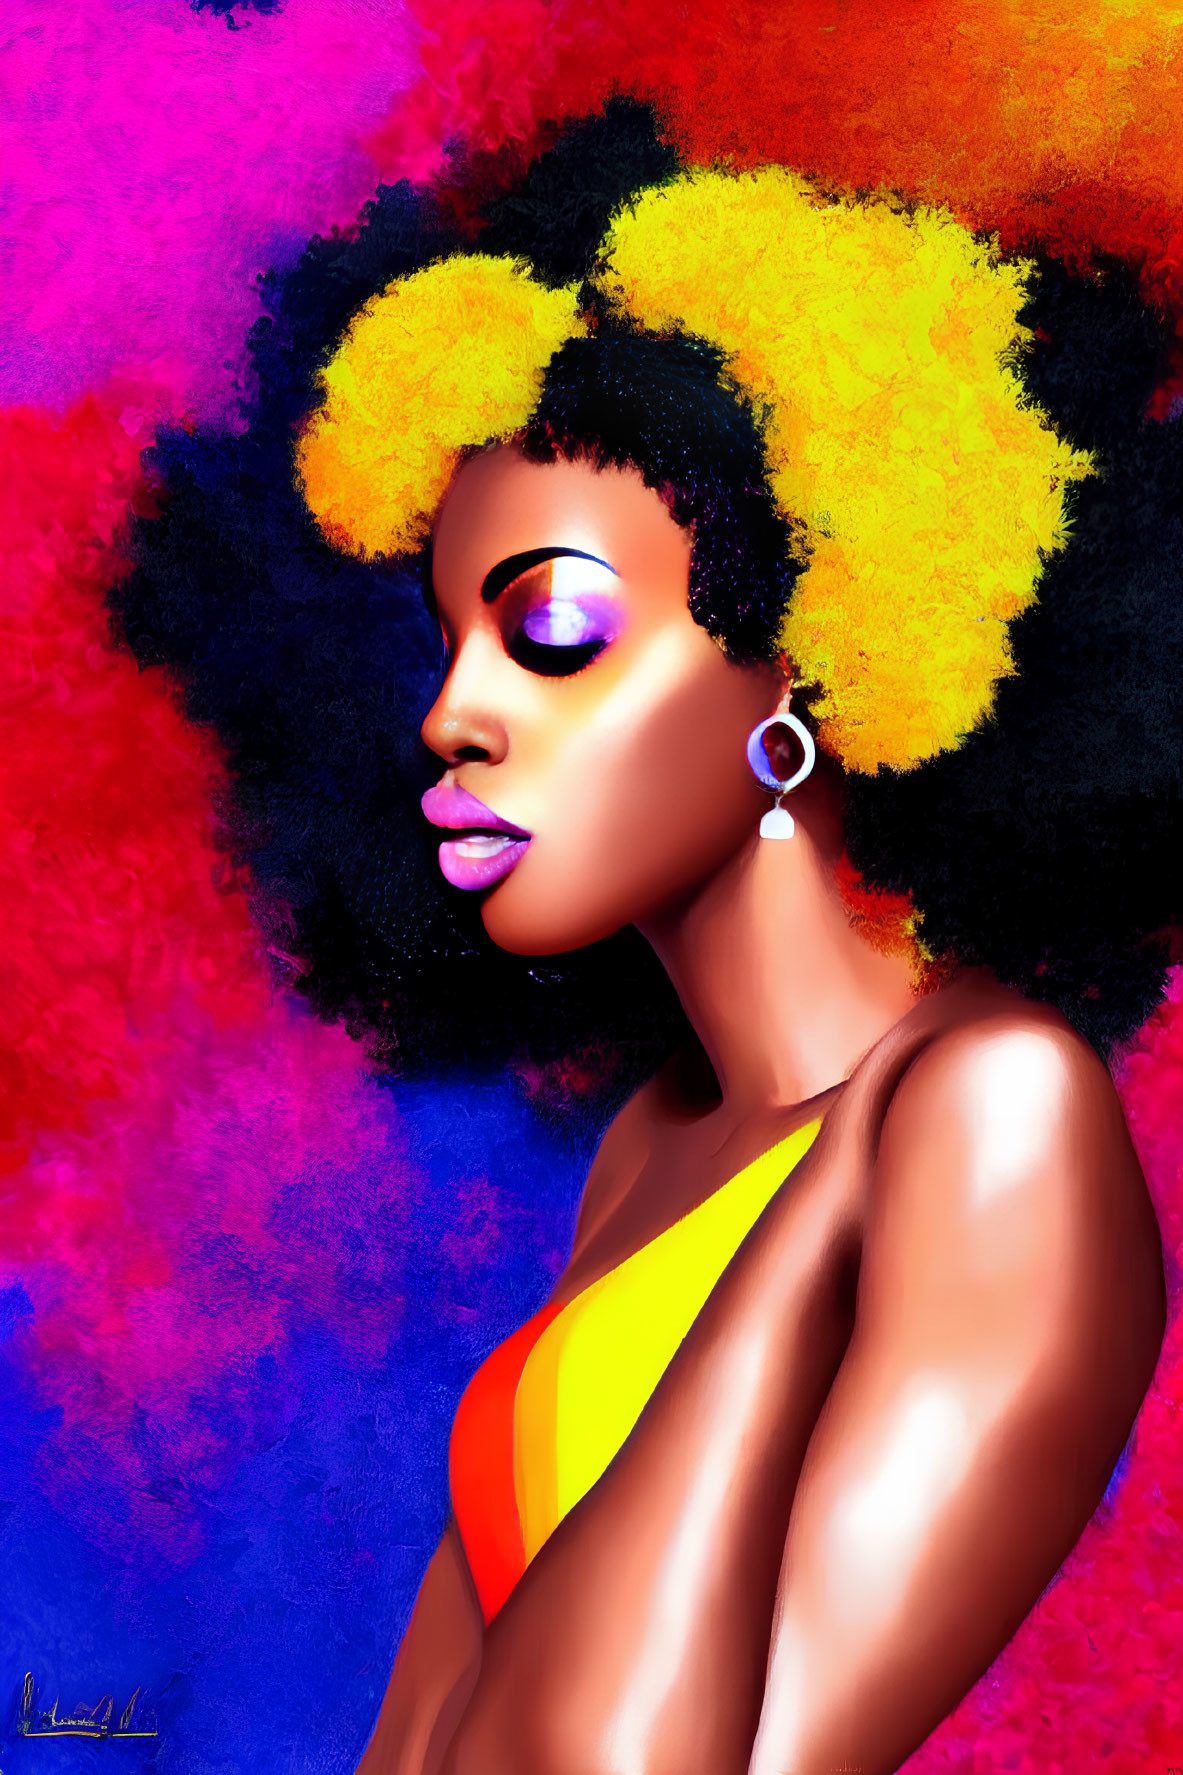 Colorful digital artwork: Woman with yellow afro hair and bold makeup on abstract background